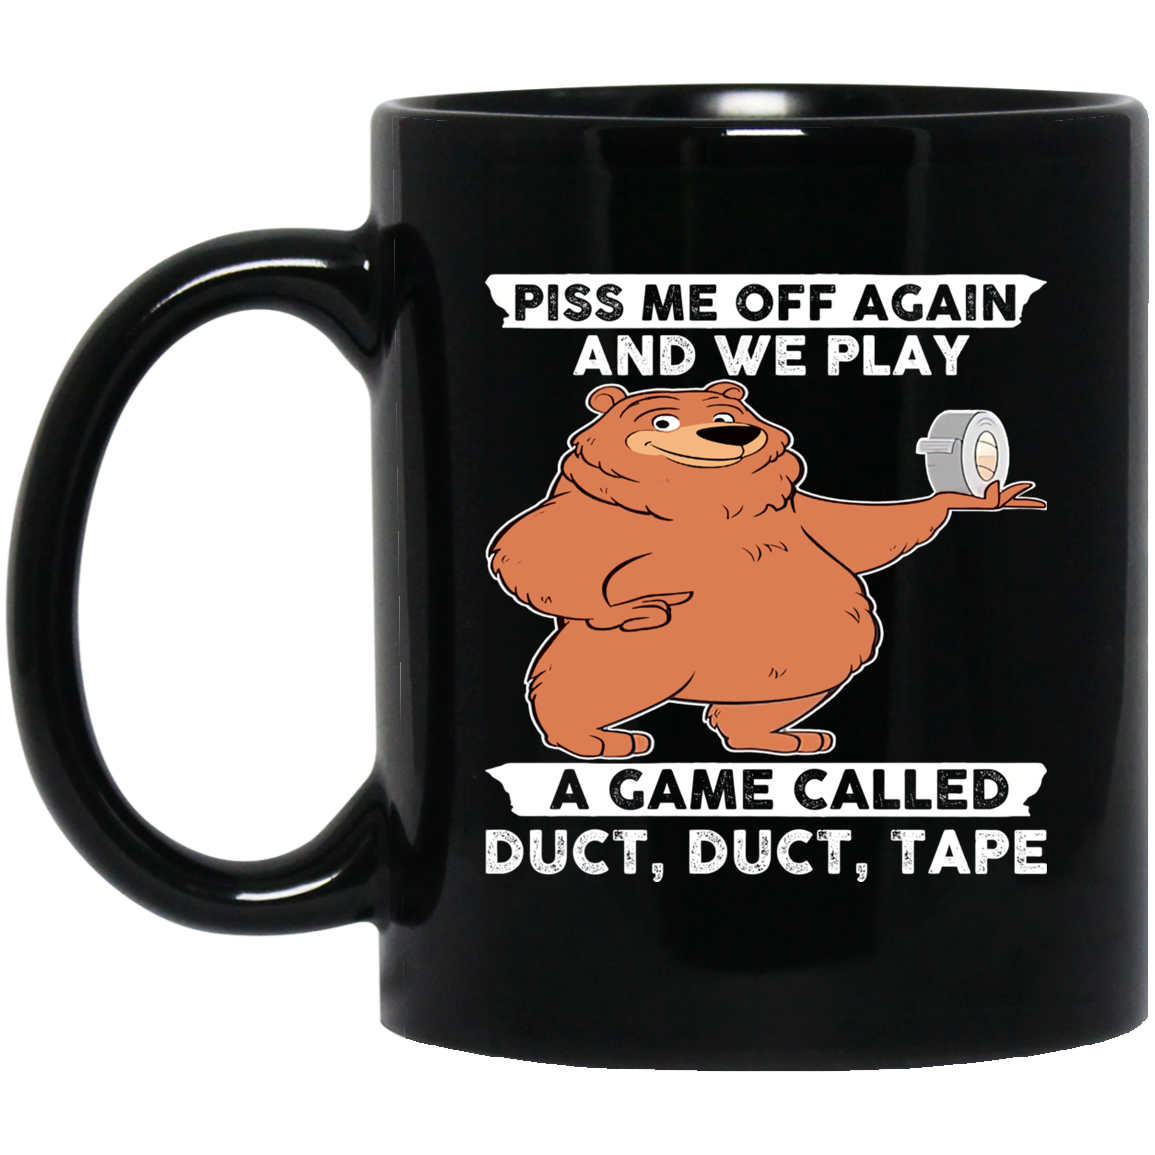 Bear Piss Me Off Again And We Play A Game Called Duct Duct Tape Mug